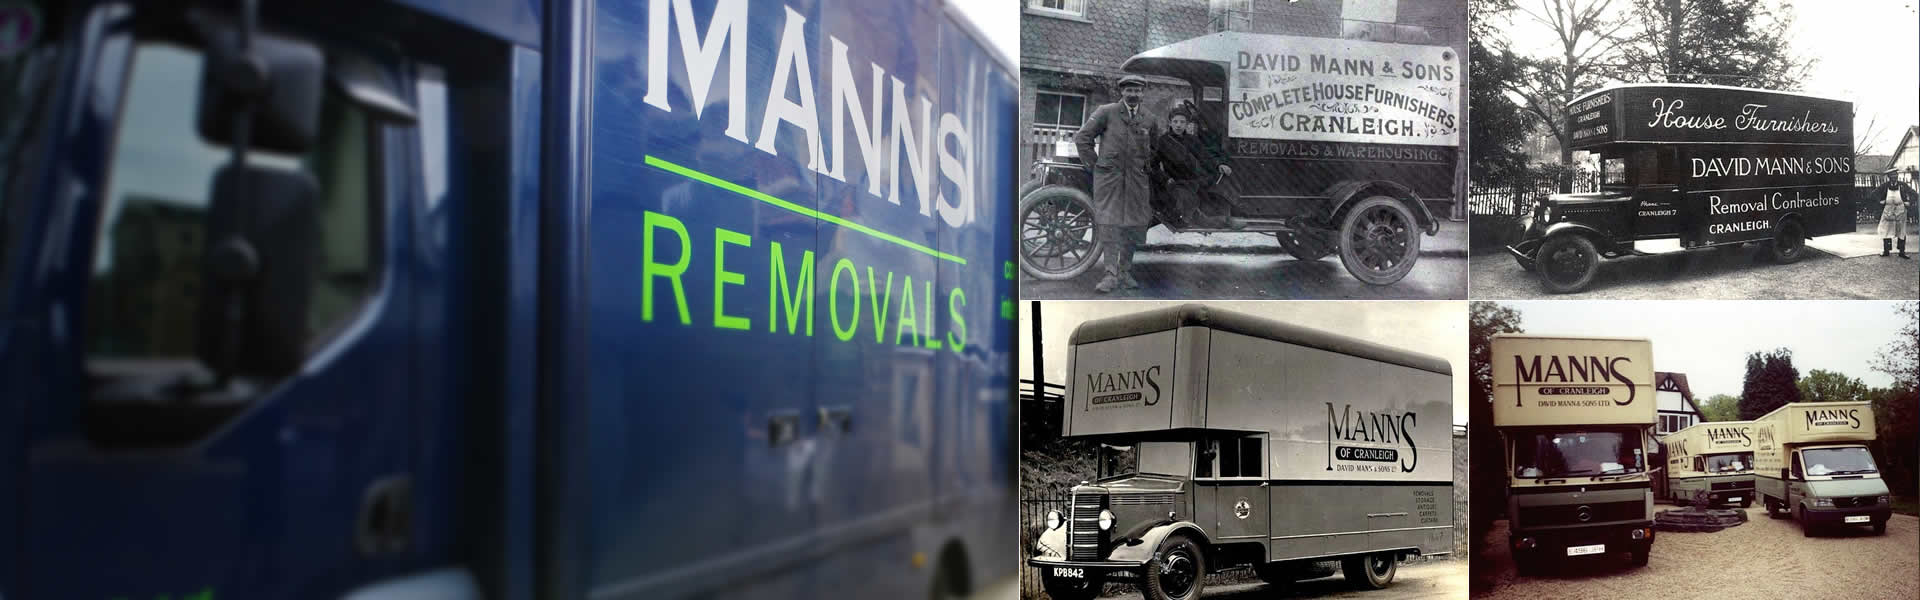 Moving homes in Surrey and beyond since 1887